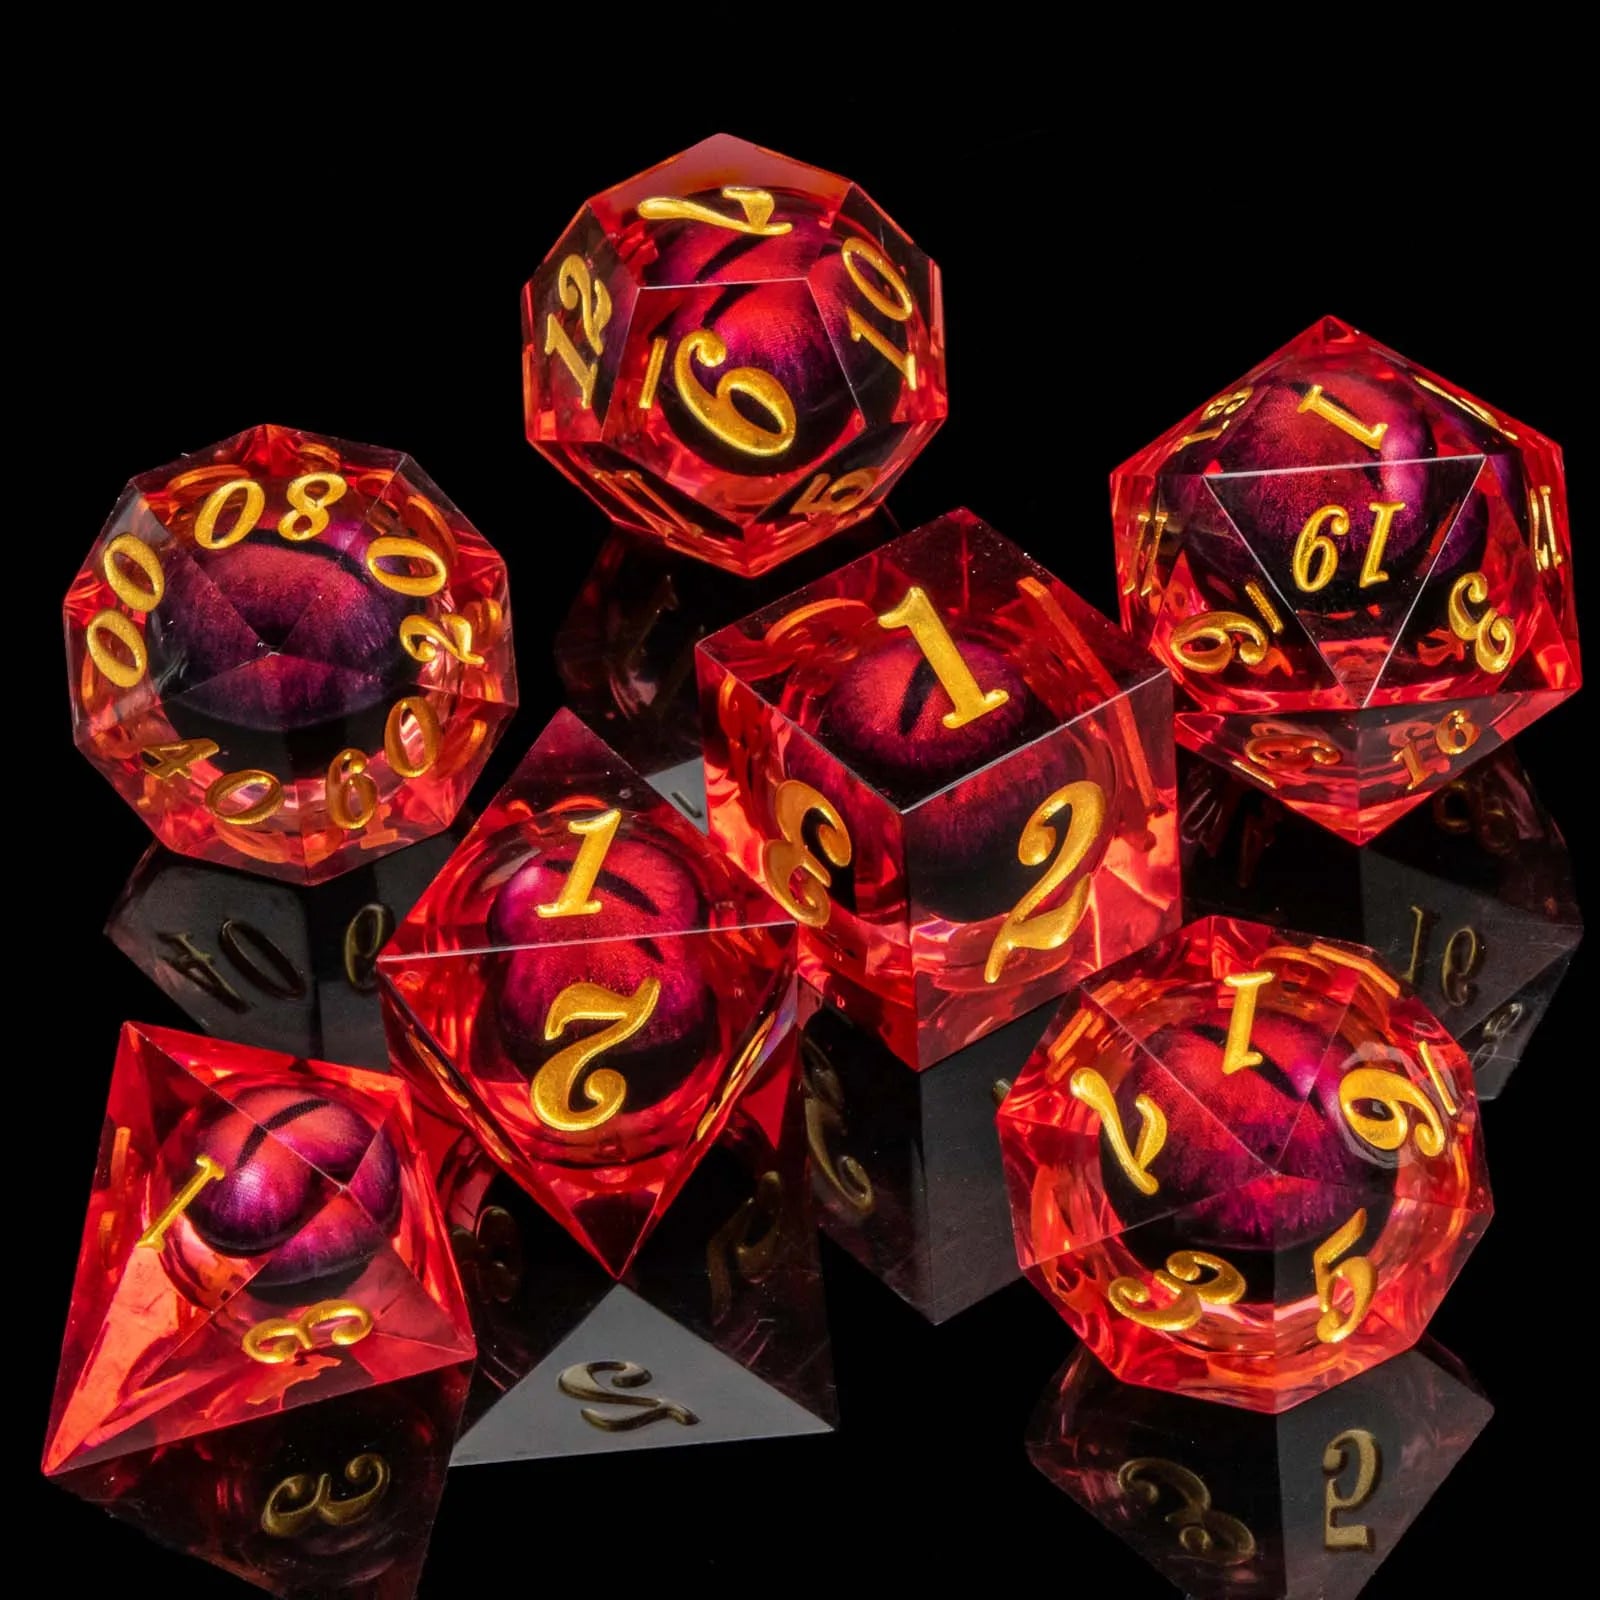 D and D Flowing Sand Sharp Edge Dragon Eye Dnd Resin RPG Polyhedral D&D Dice Set For Dungeon and Dragon Pathfinder Role Playing AZ07